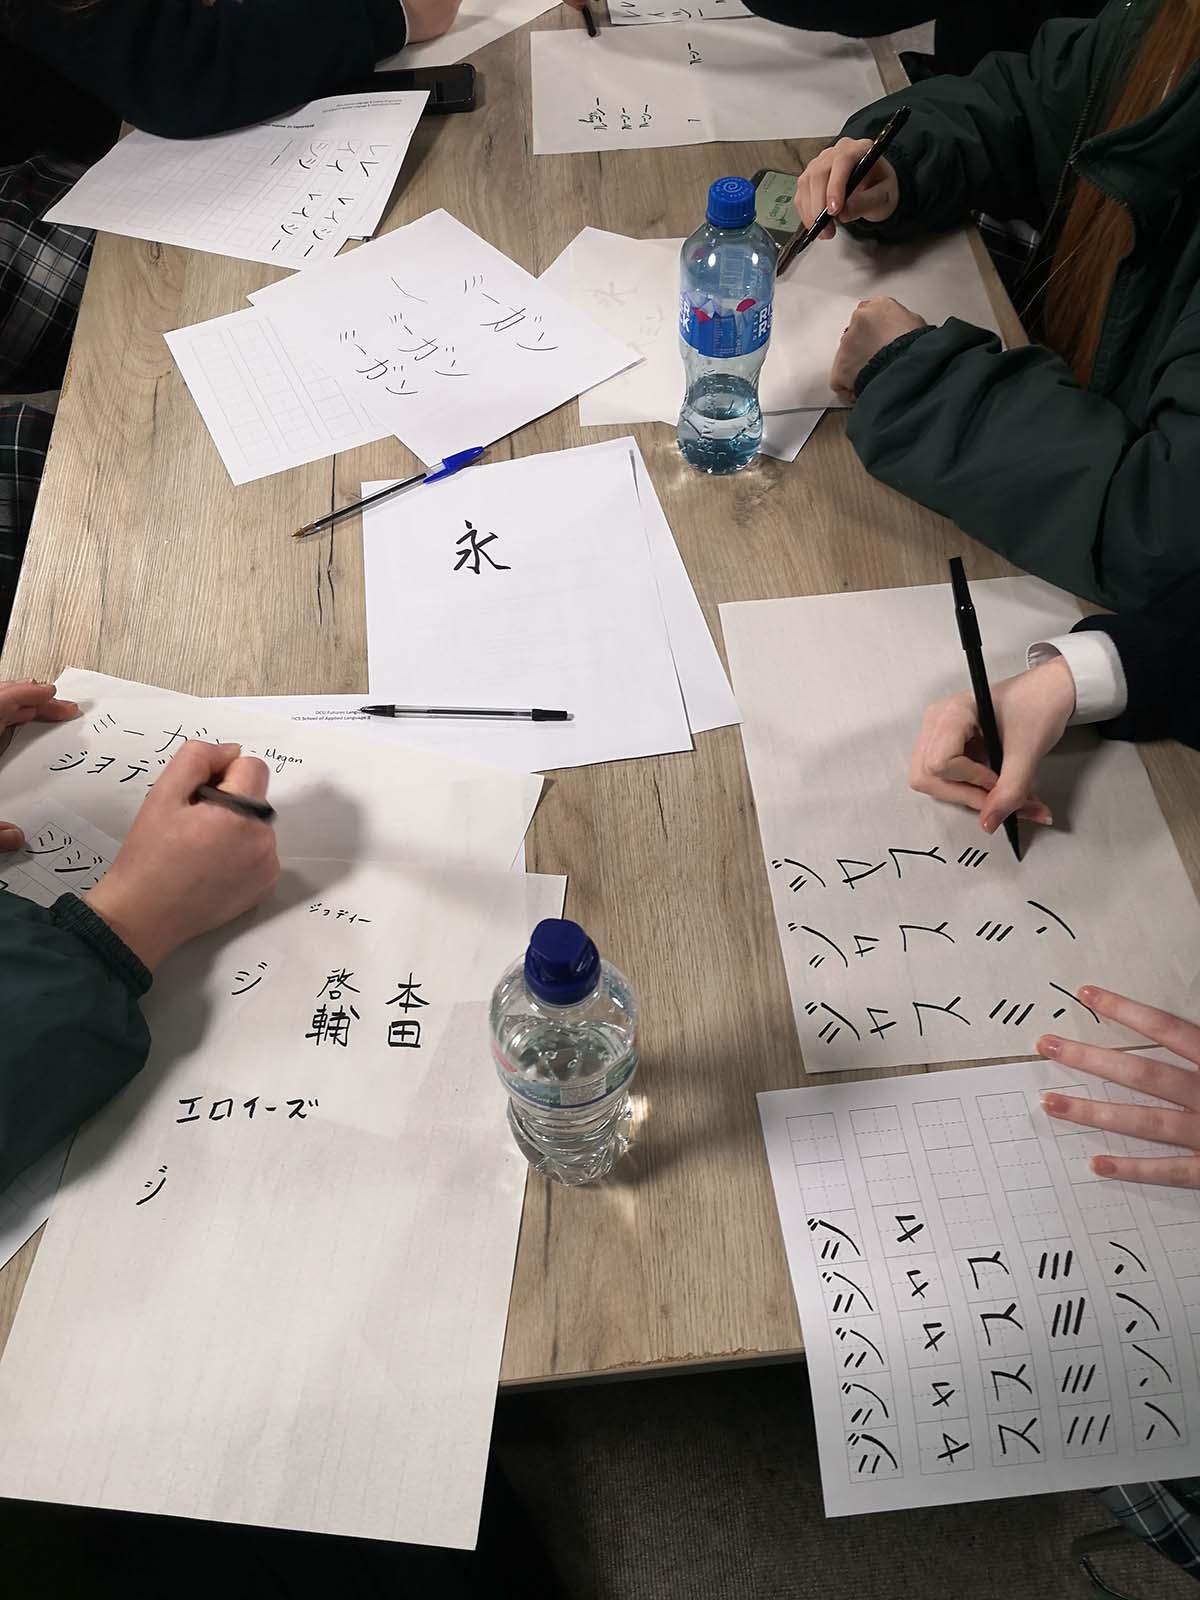 A Japanese writing workshop at the School of Applied Language and Intercultural Studies.